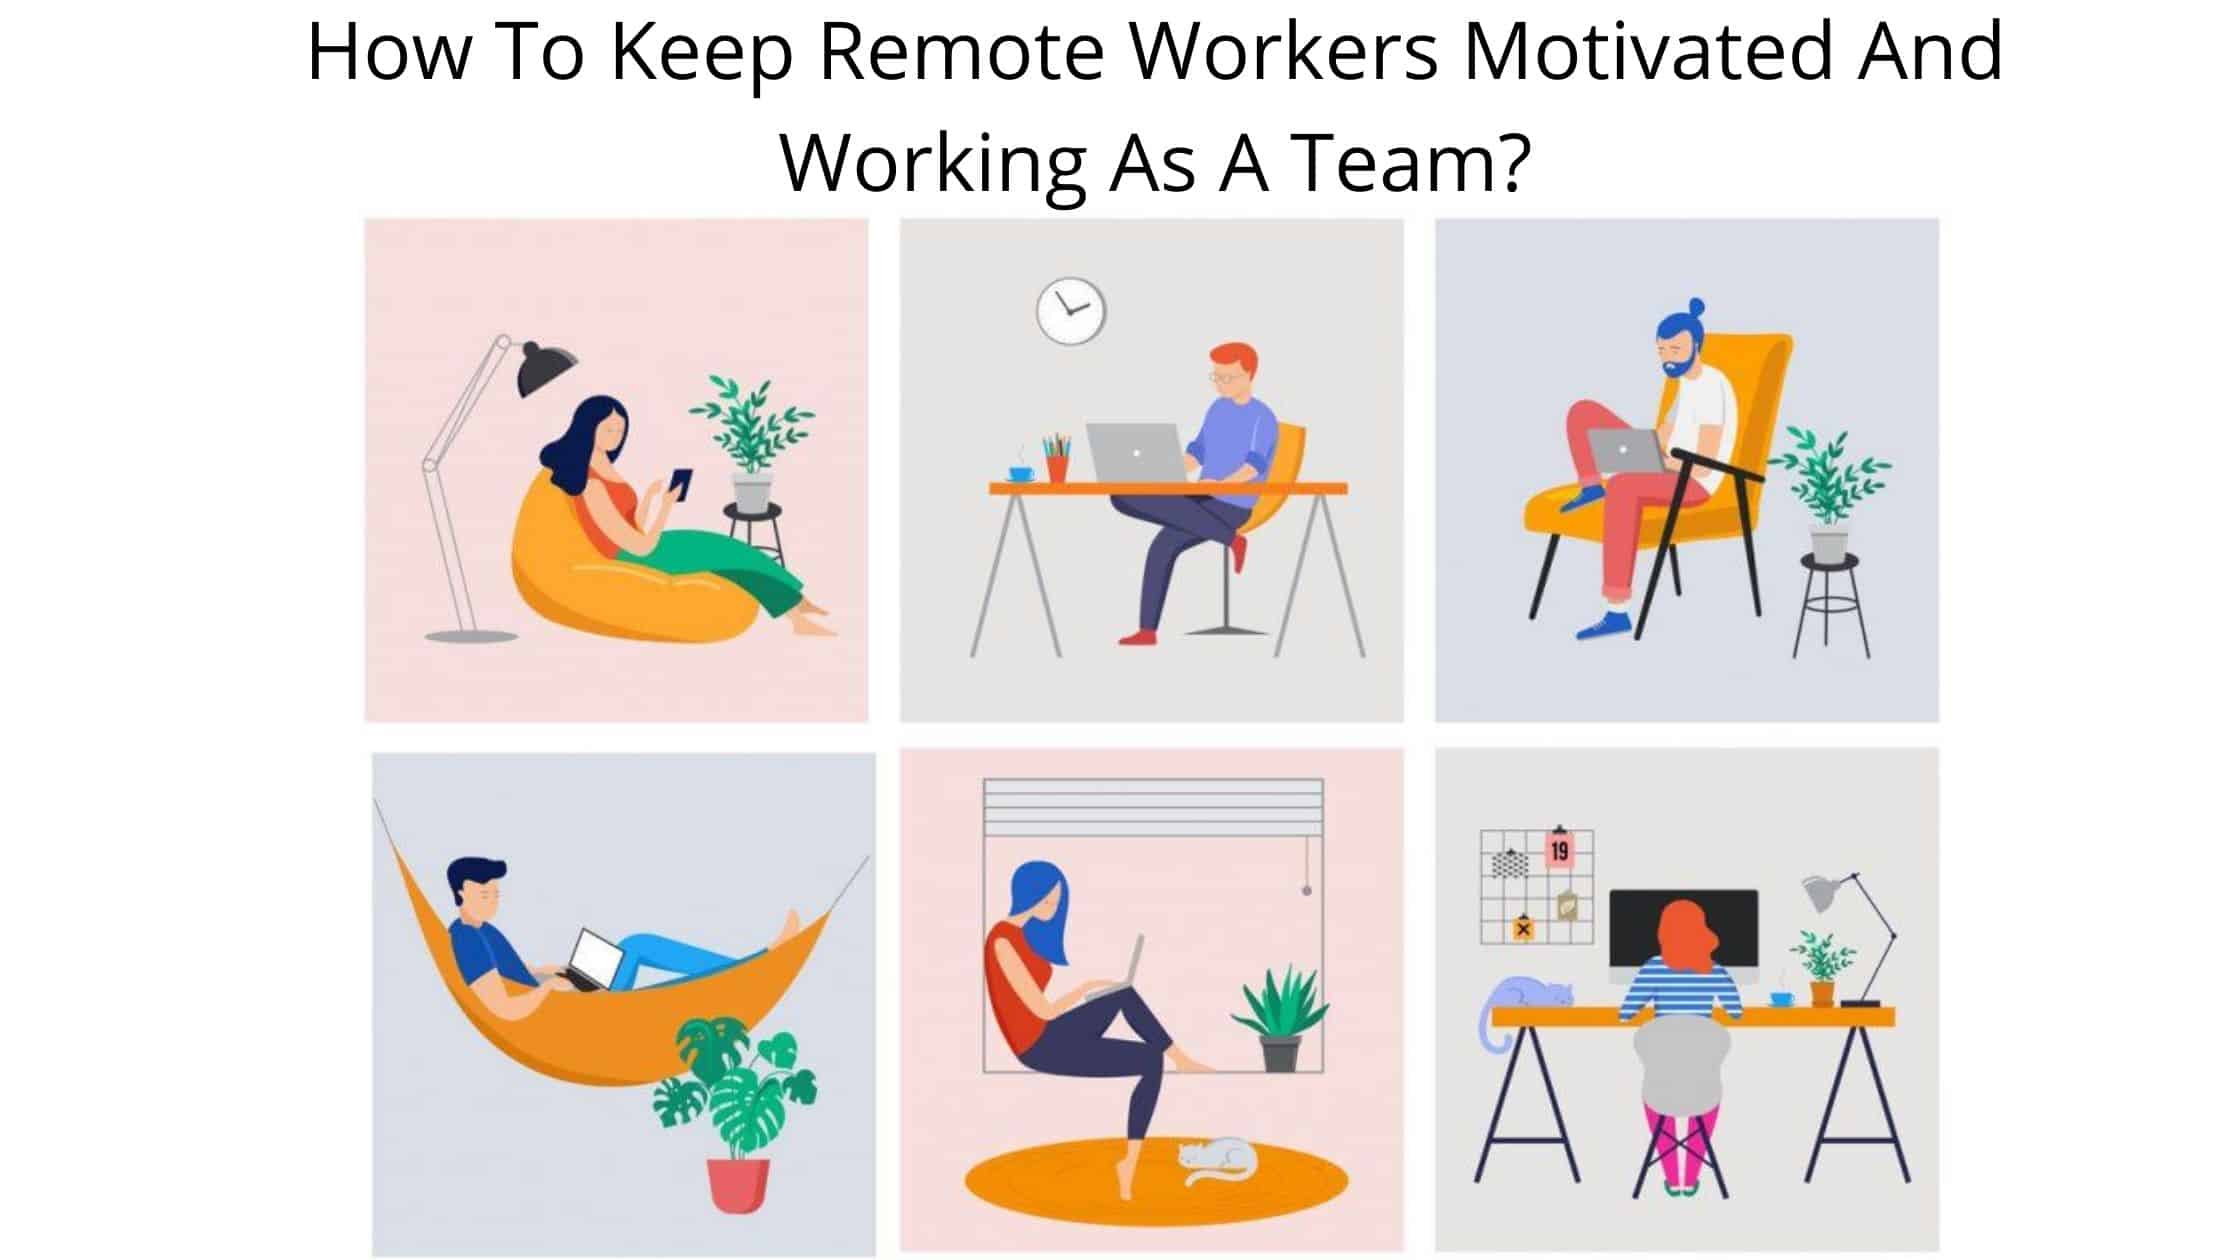 How To Keep Remote Workers Motivated And Working As A Team